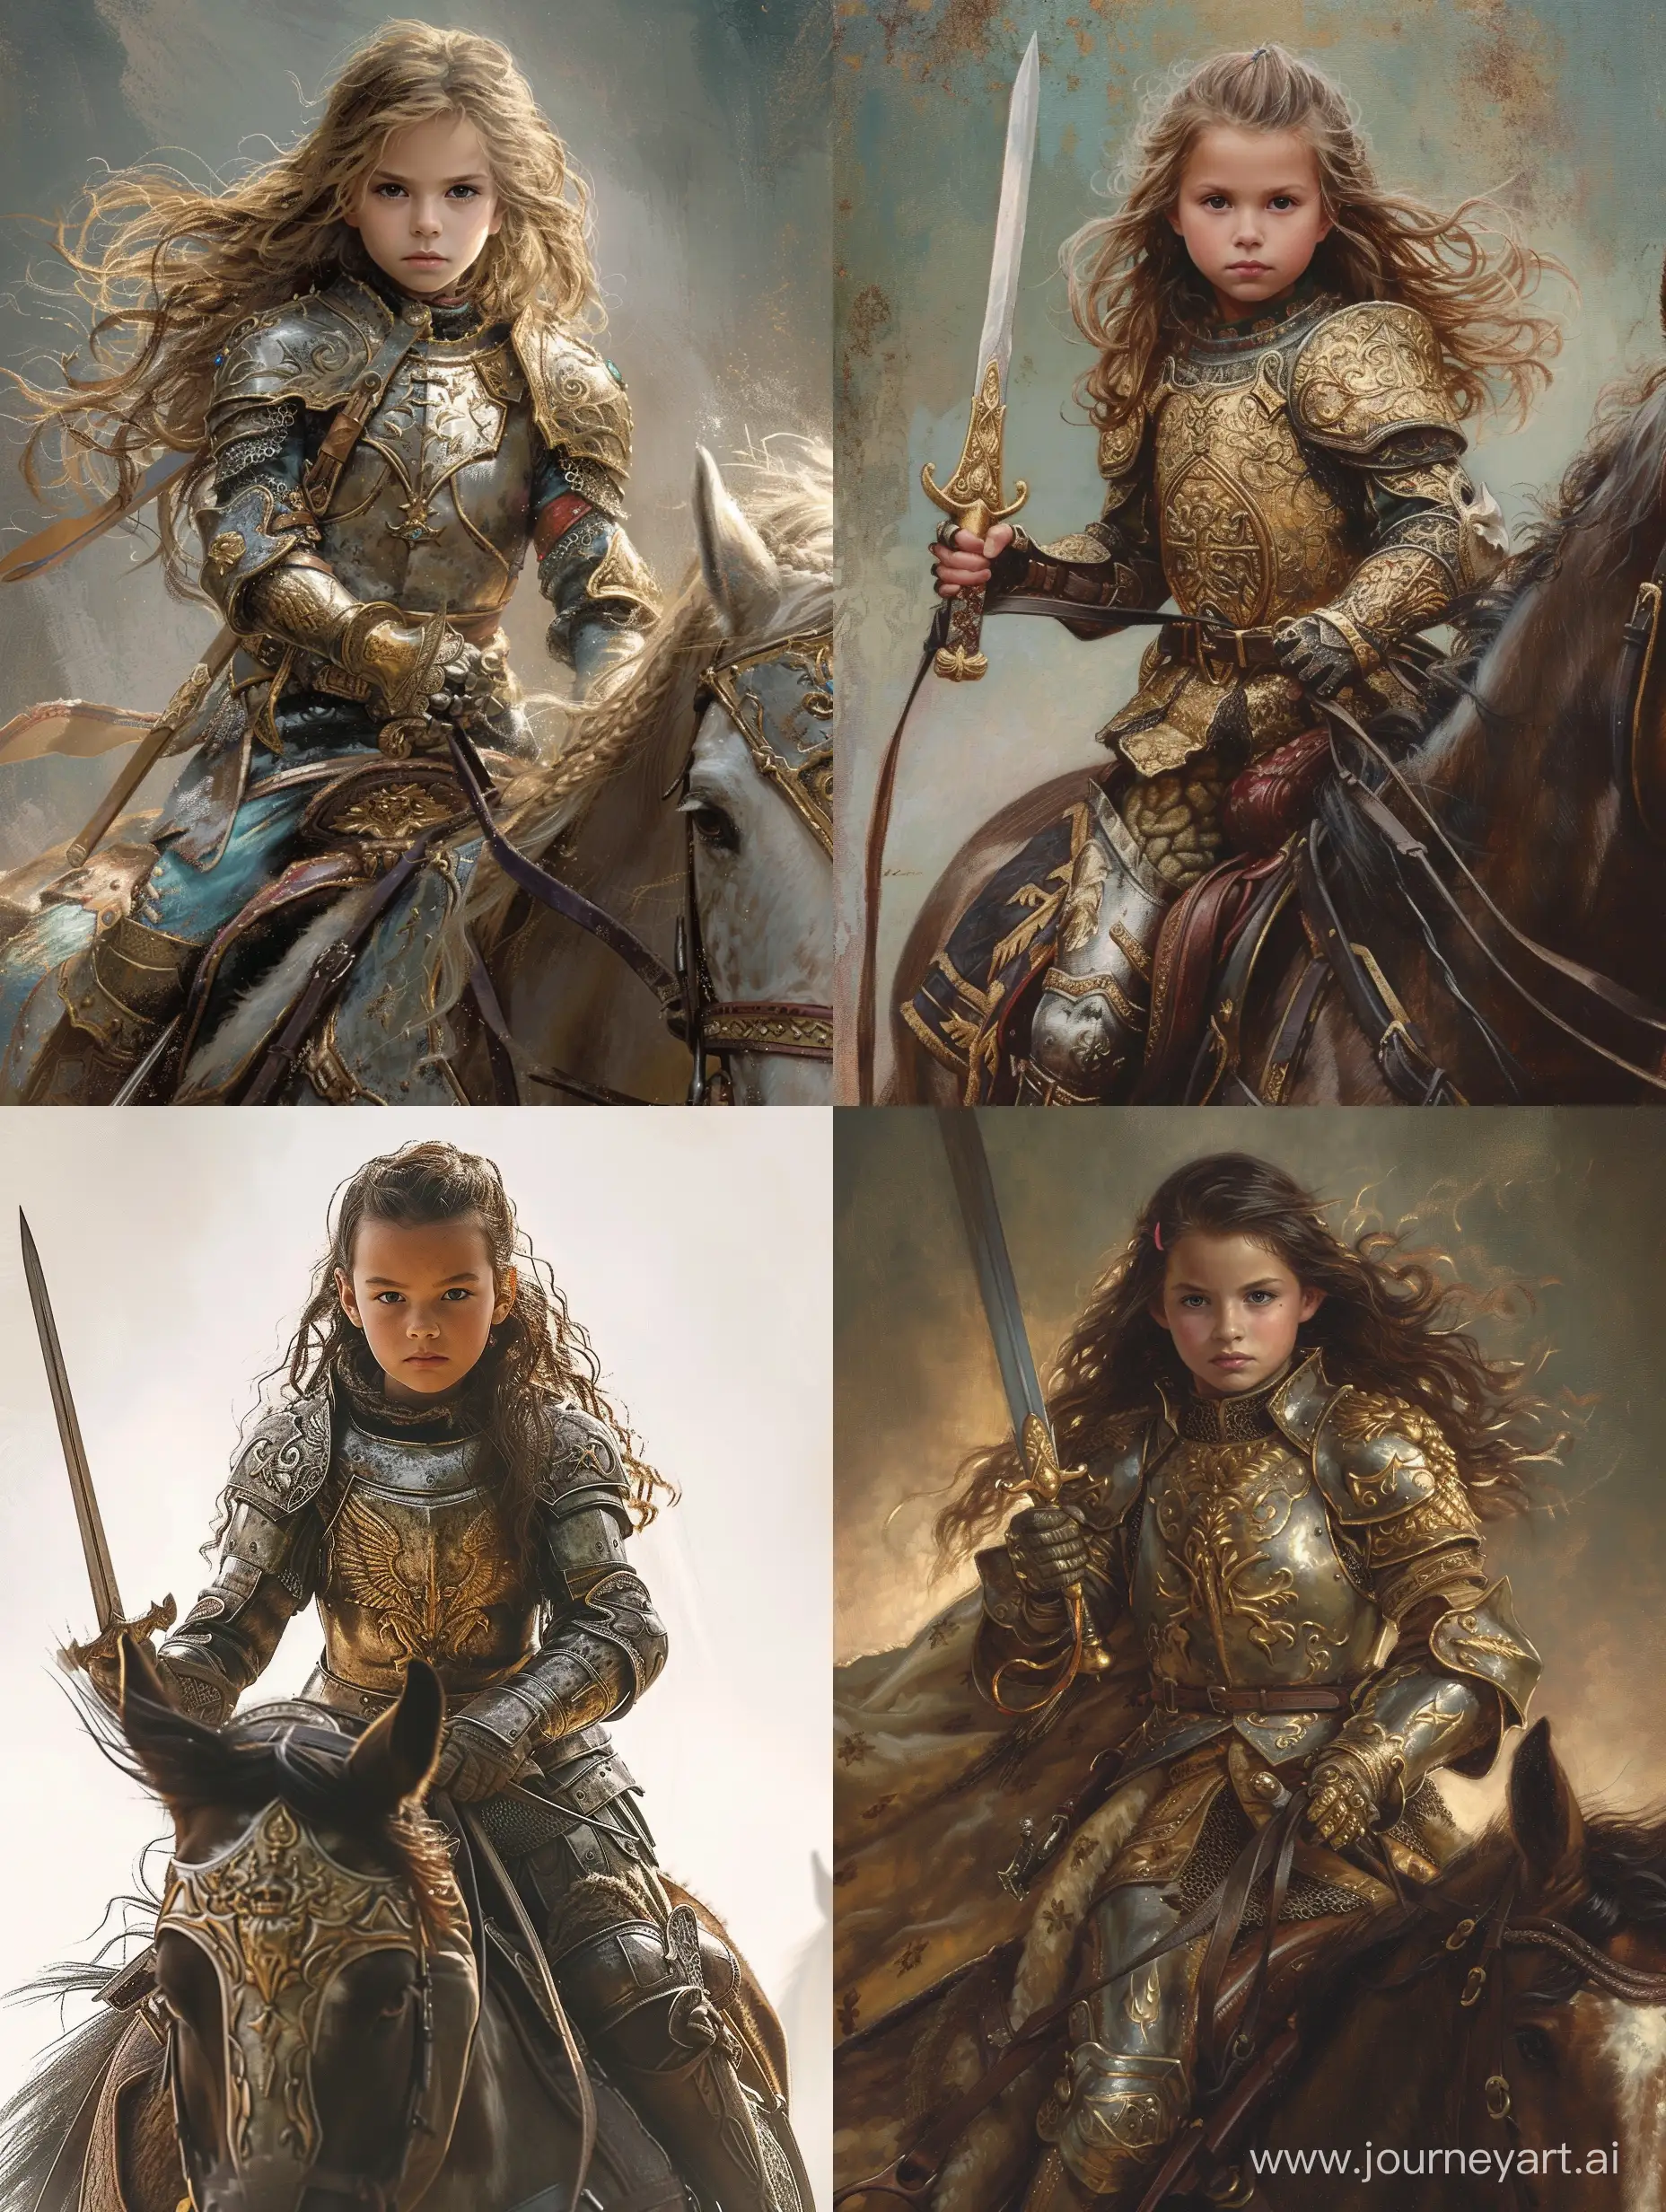 Courageous-8YearOld-Girl-in-Armor-Riding-Heroically-on-Horseback